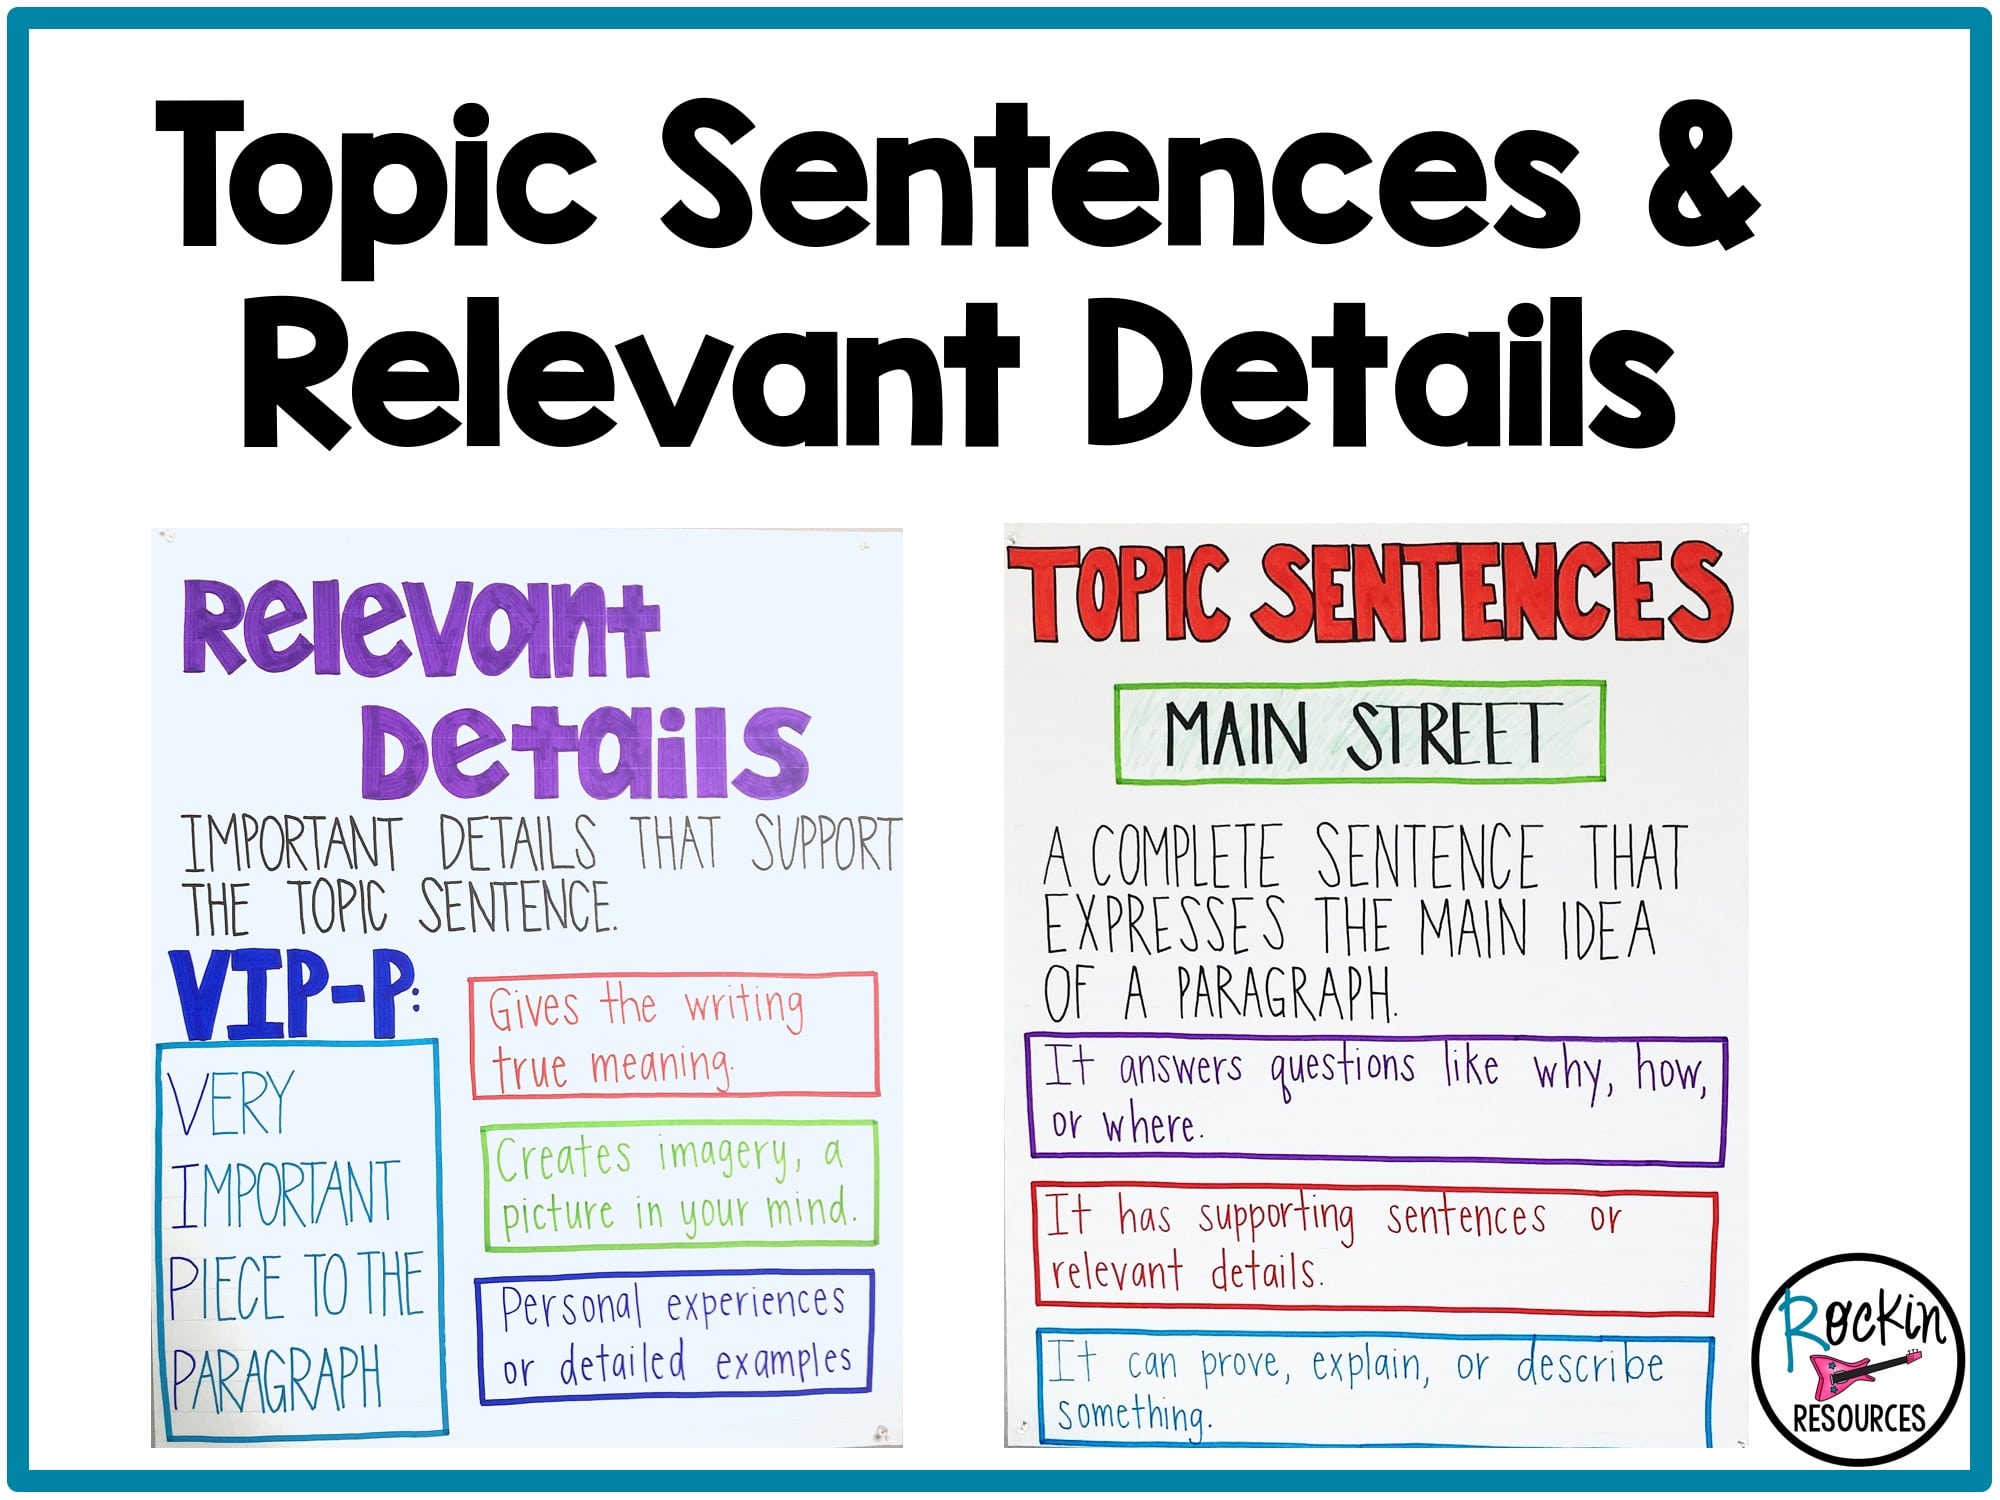 topic-sentence-definition-examples-and-useful-tips-for-writing-a